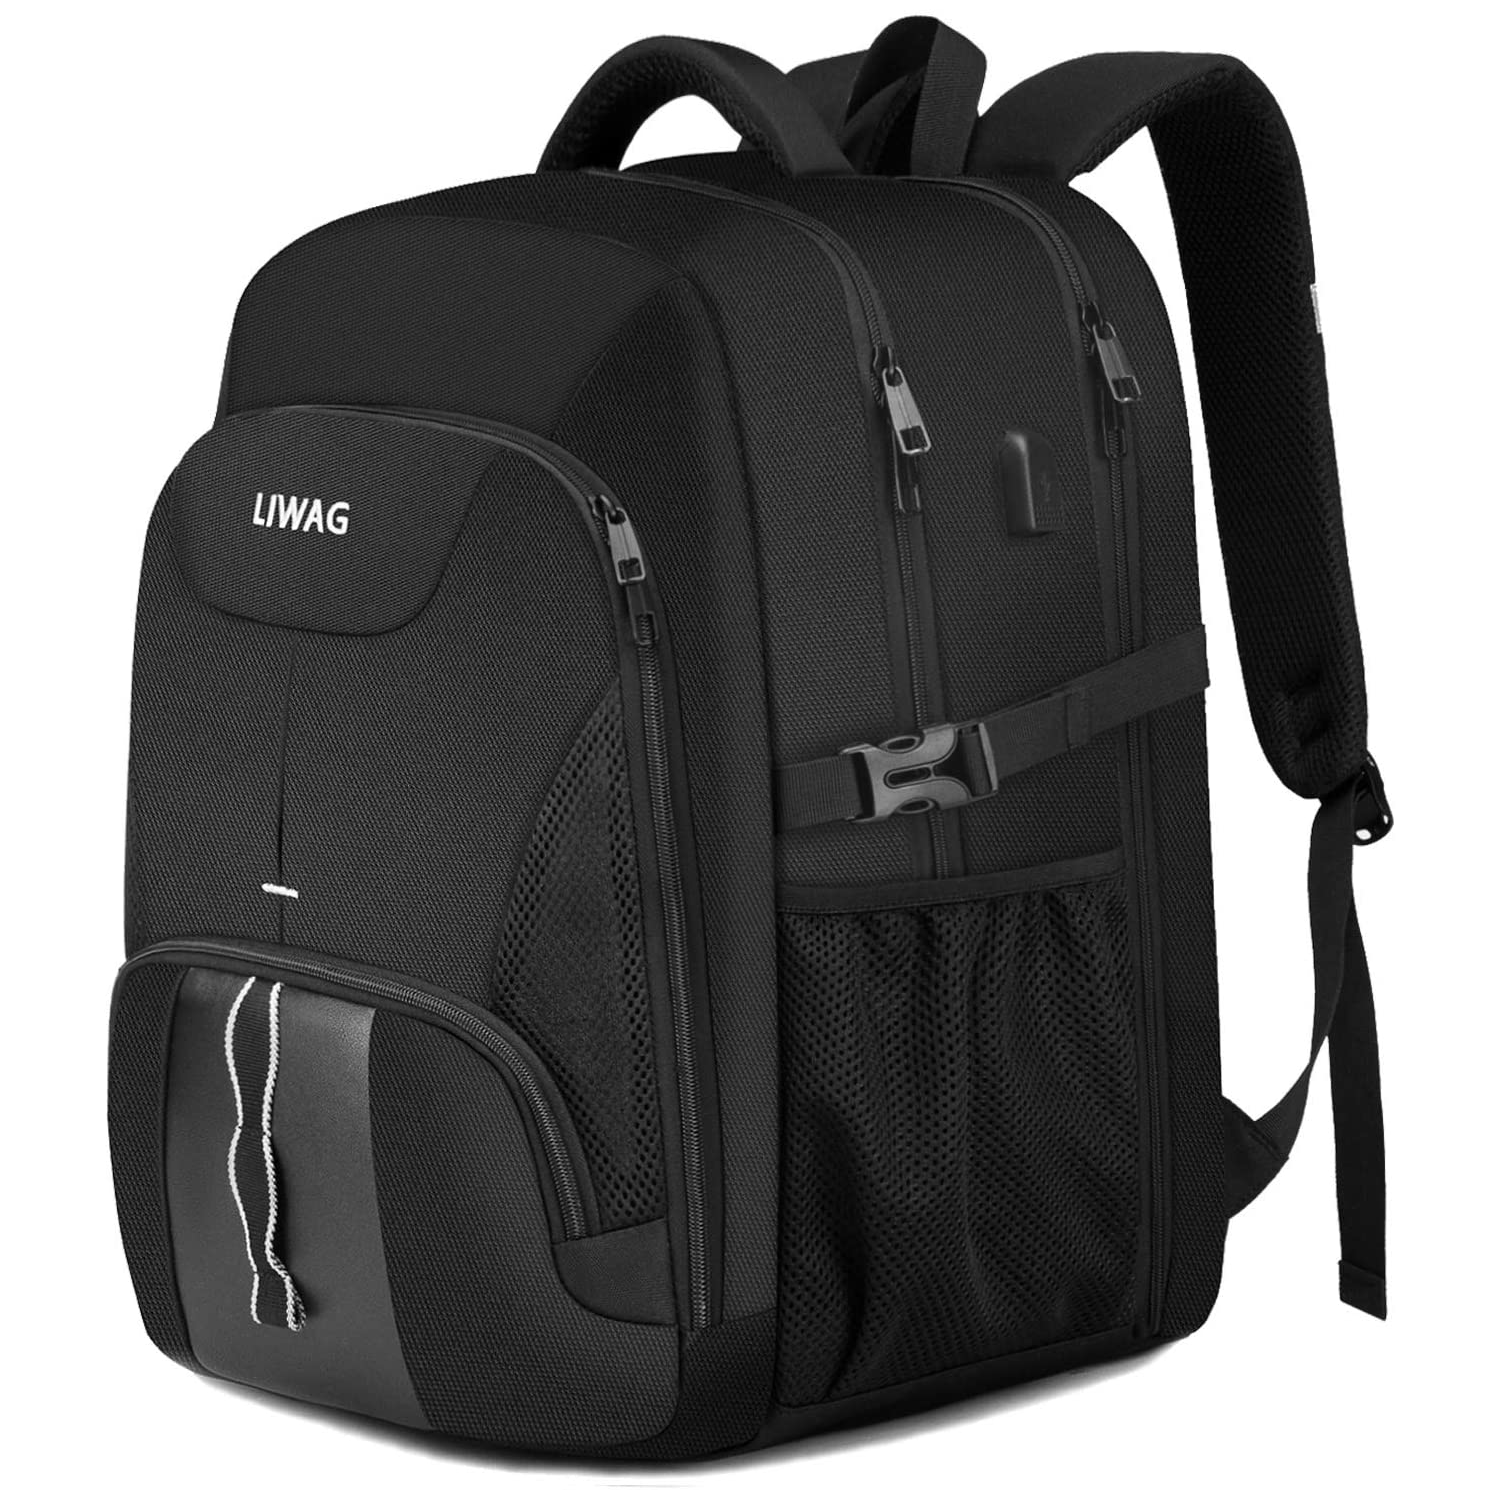 LIWAG Laptop Backpack Front View